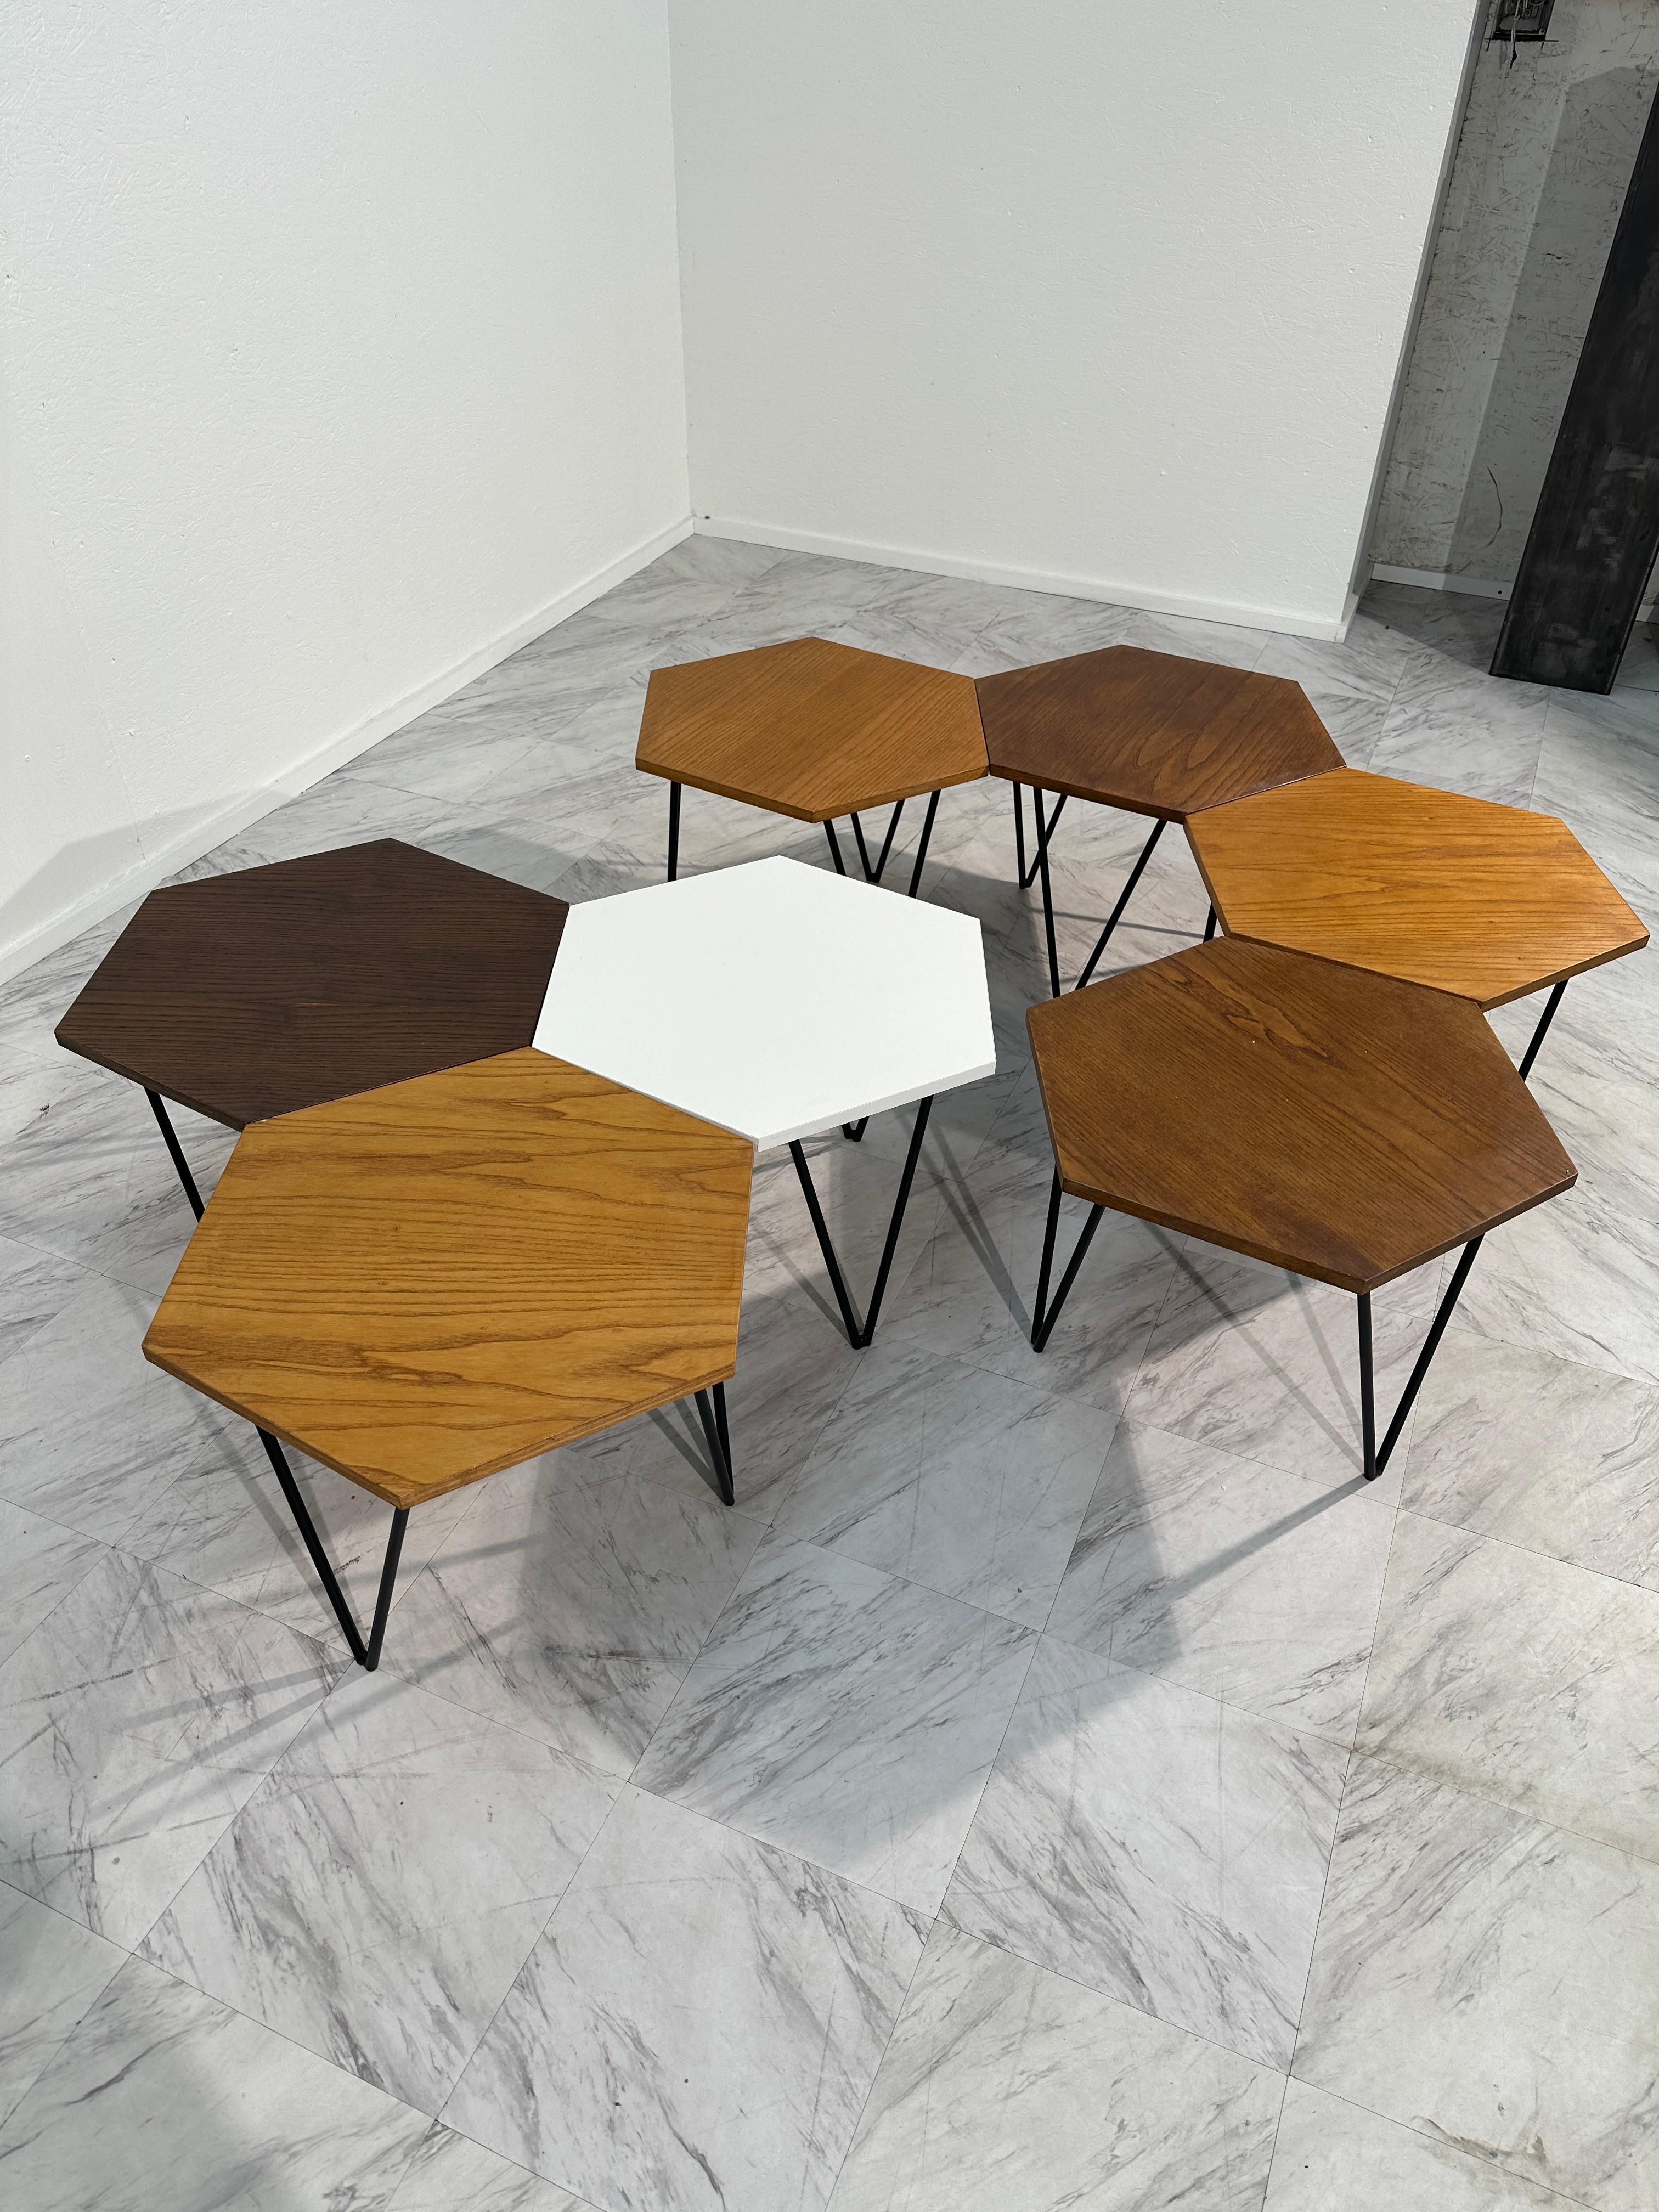 Set of 7 Gio Ponti Modular Hexagonal Coffee Tables, ISA Bergamo, Italy, 1950s In Good Condition For Sale In Los Angeles, CA